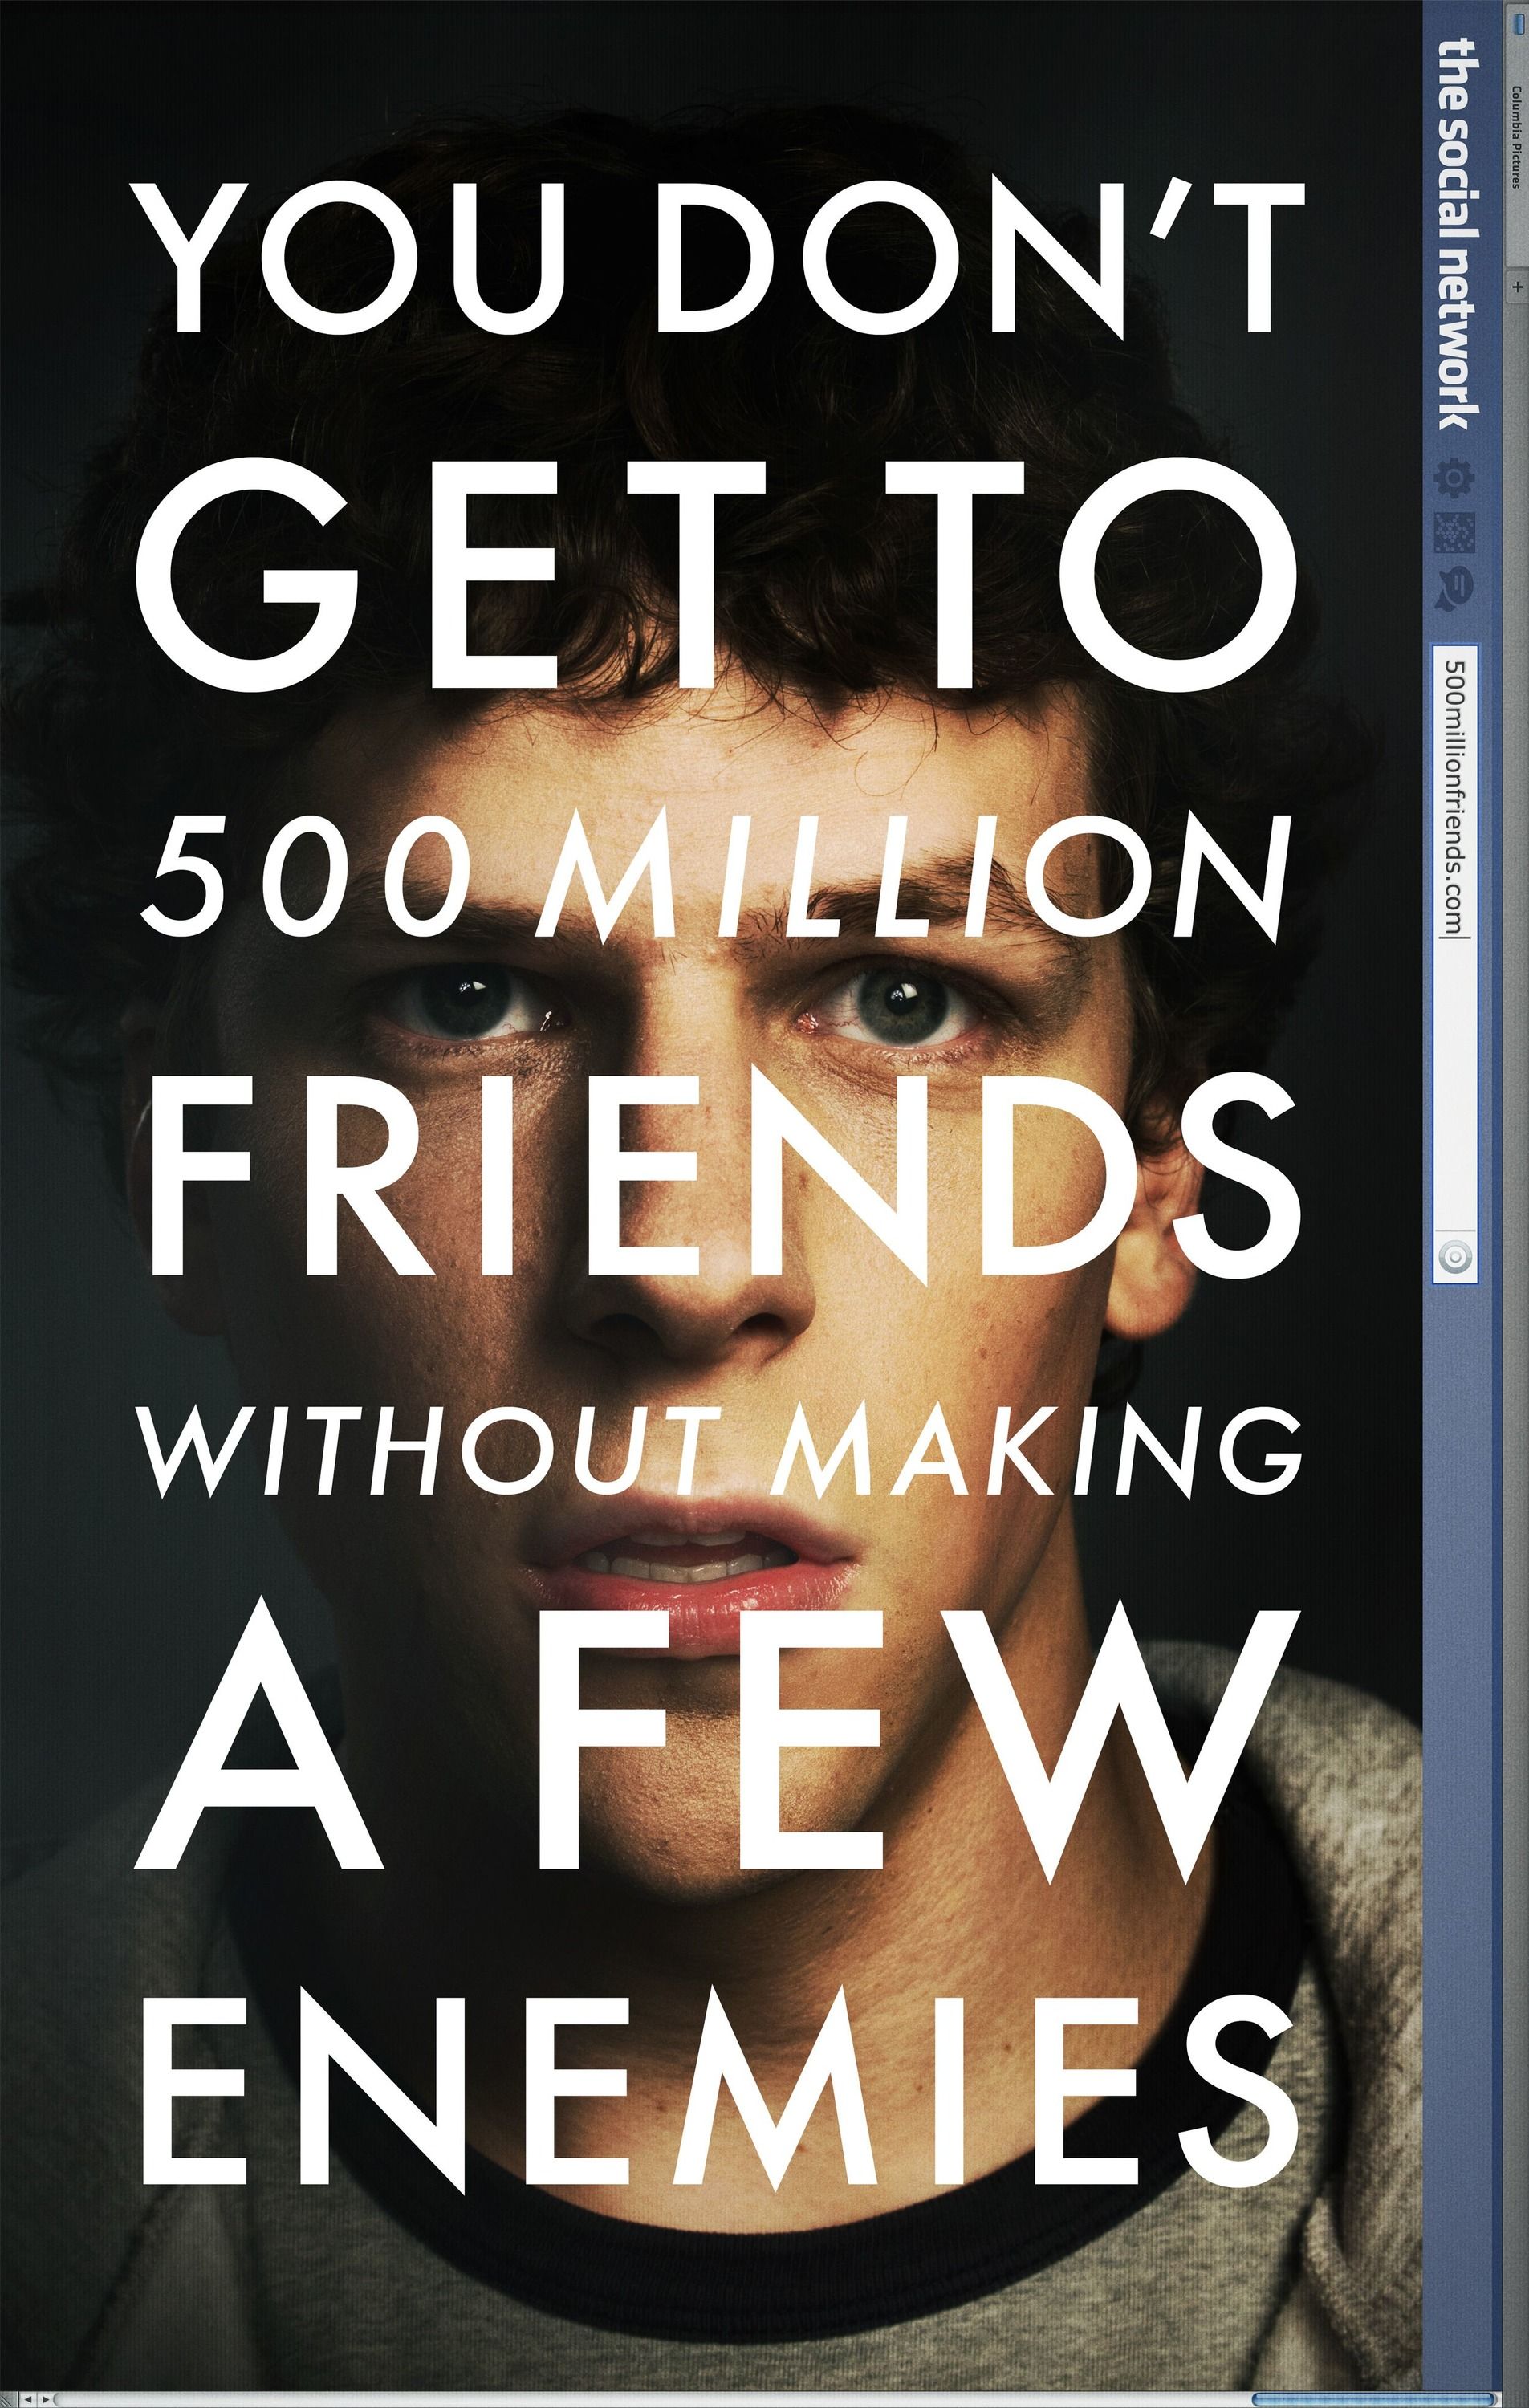 Poster for the film The Social Network